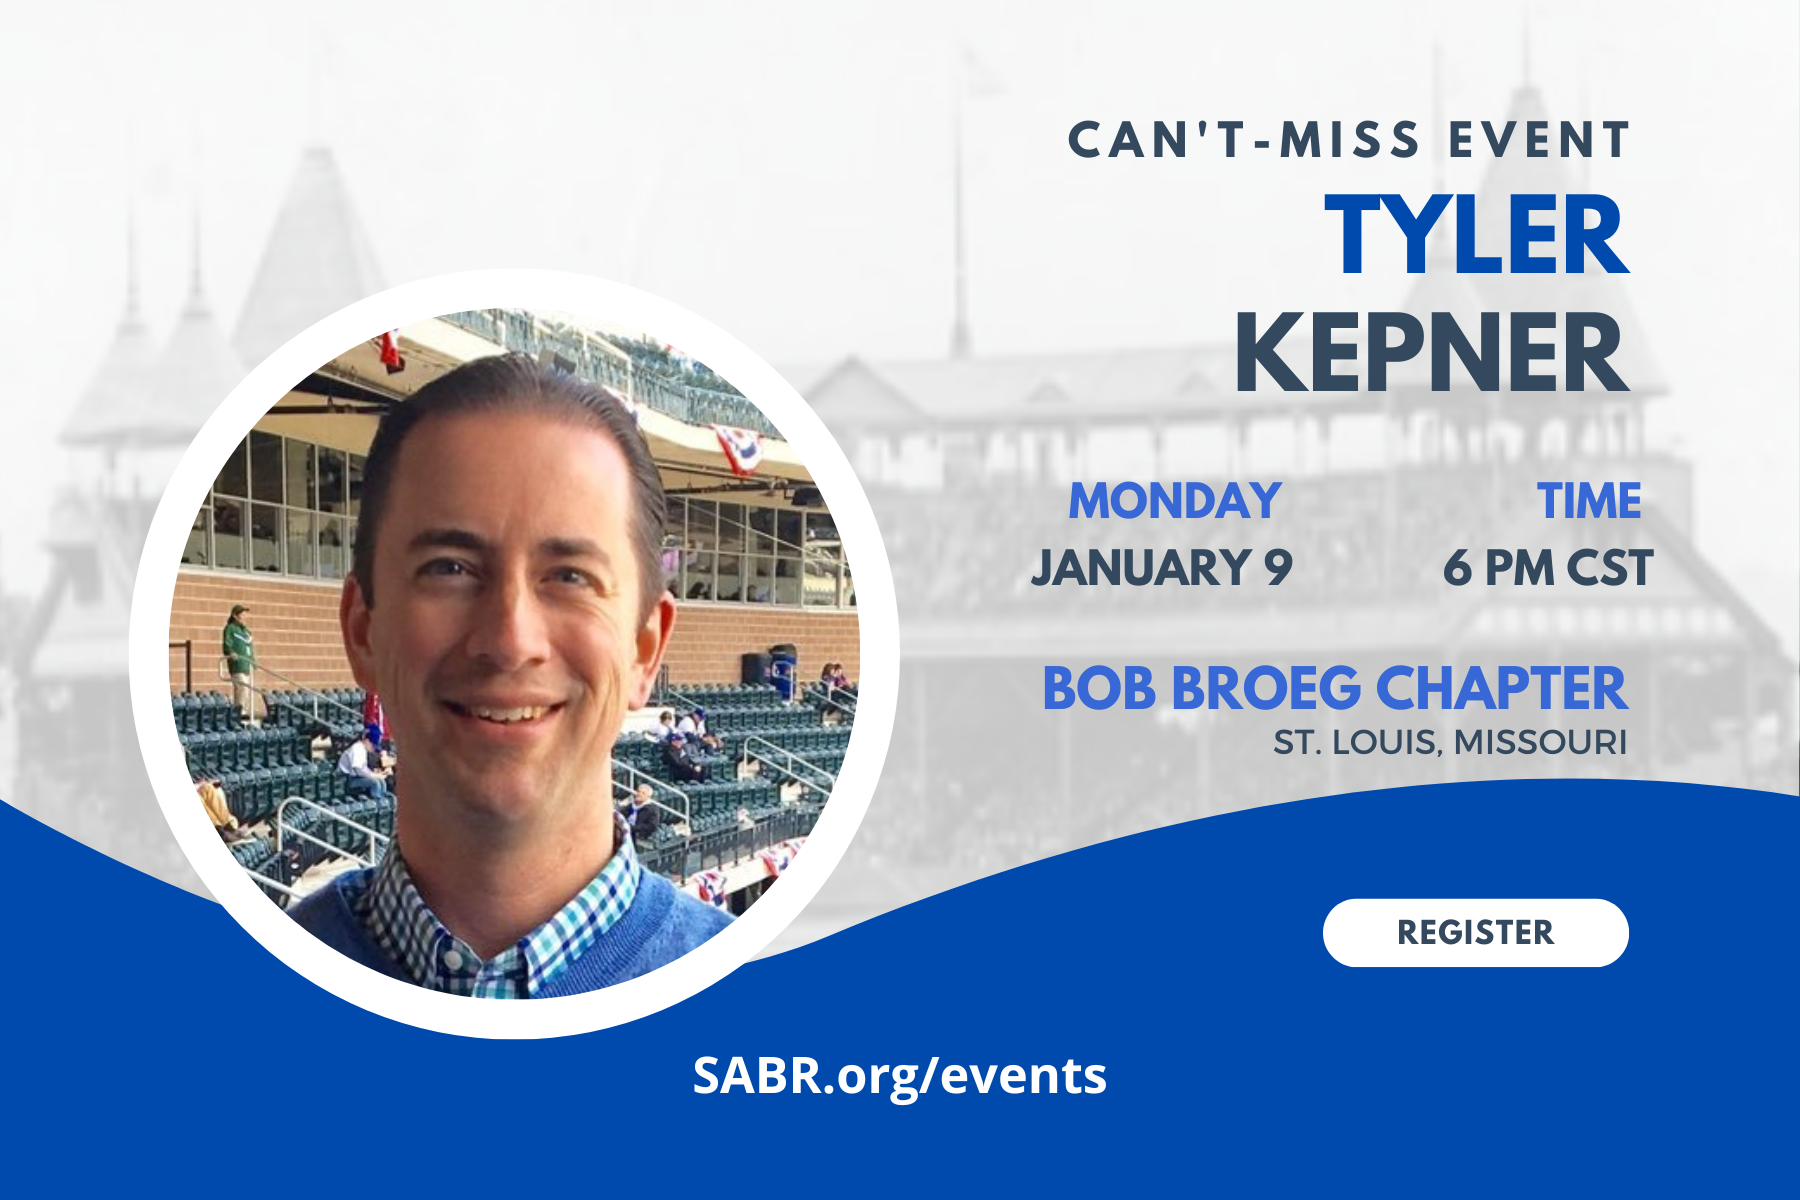 Tyler Kepner, author of "The Grandest Stage," will speak via Zoom to the SABR Bob Broeg St. Louis Chapter at 6:00 p.m. Central on Monday, January 9